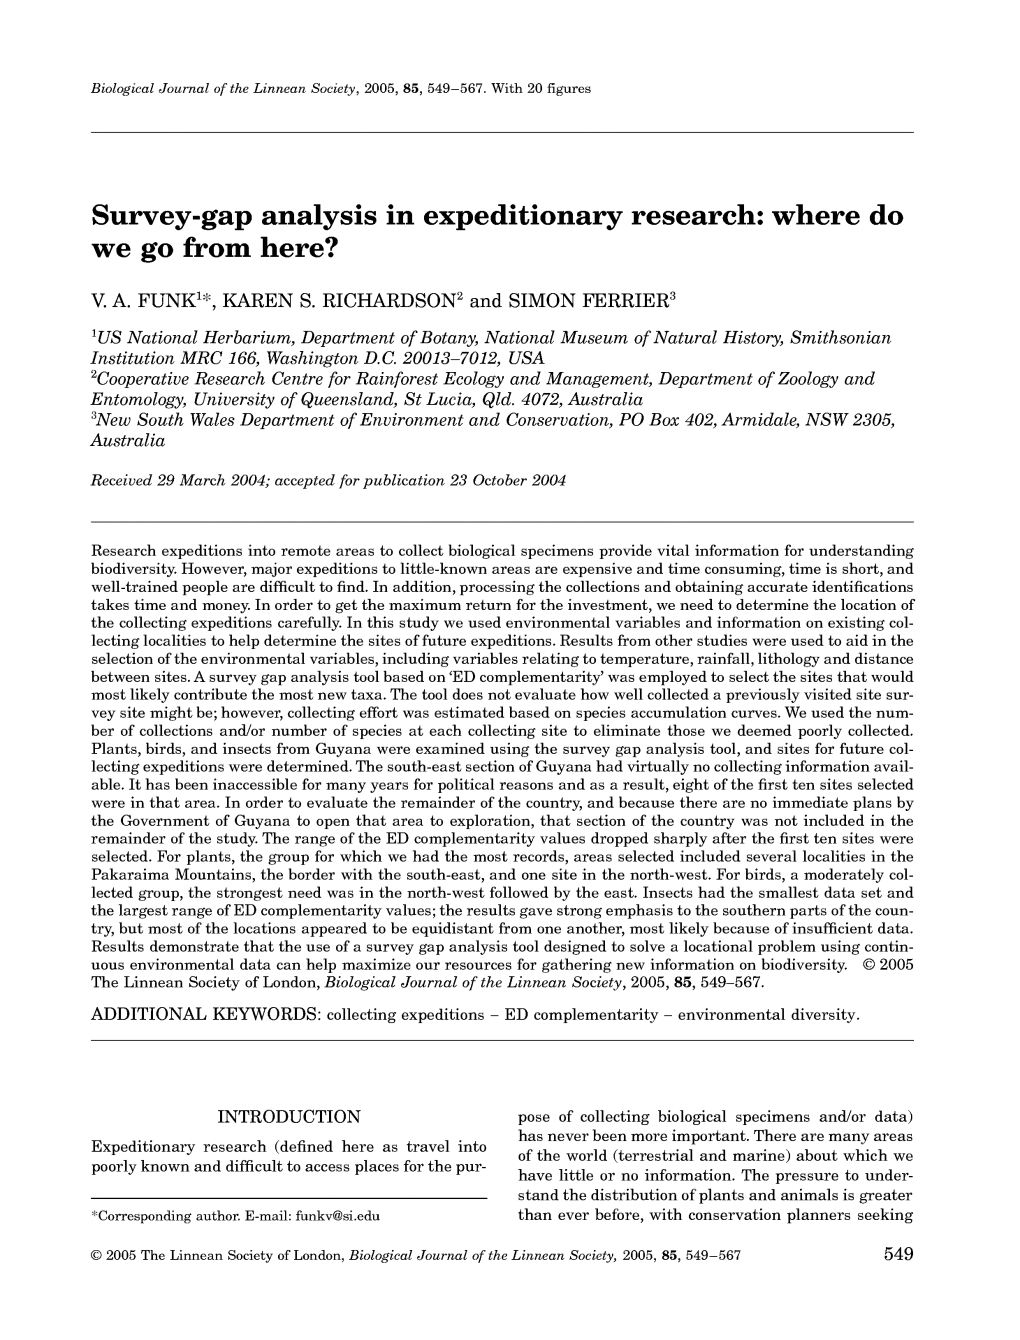 Survey-Gap Analysis in Expeditionary Research: Where Do We Go from Here?